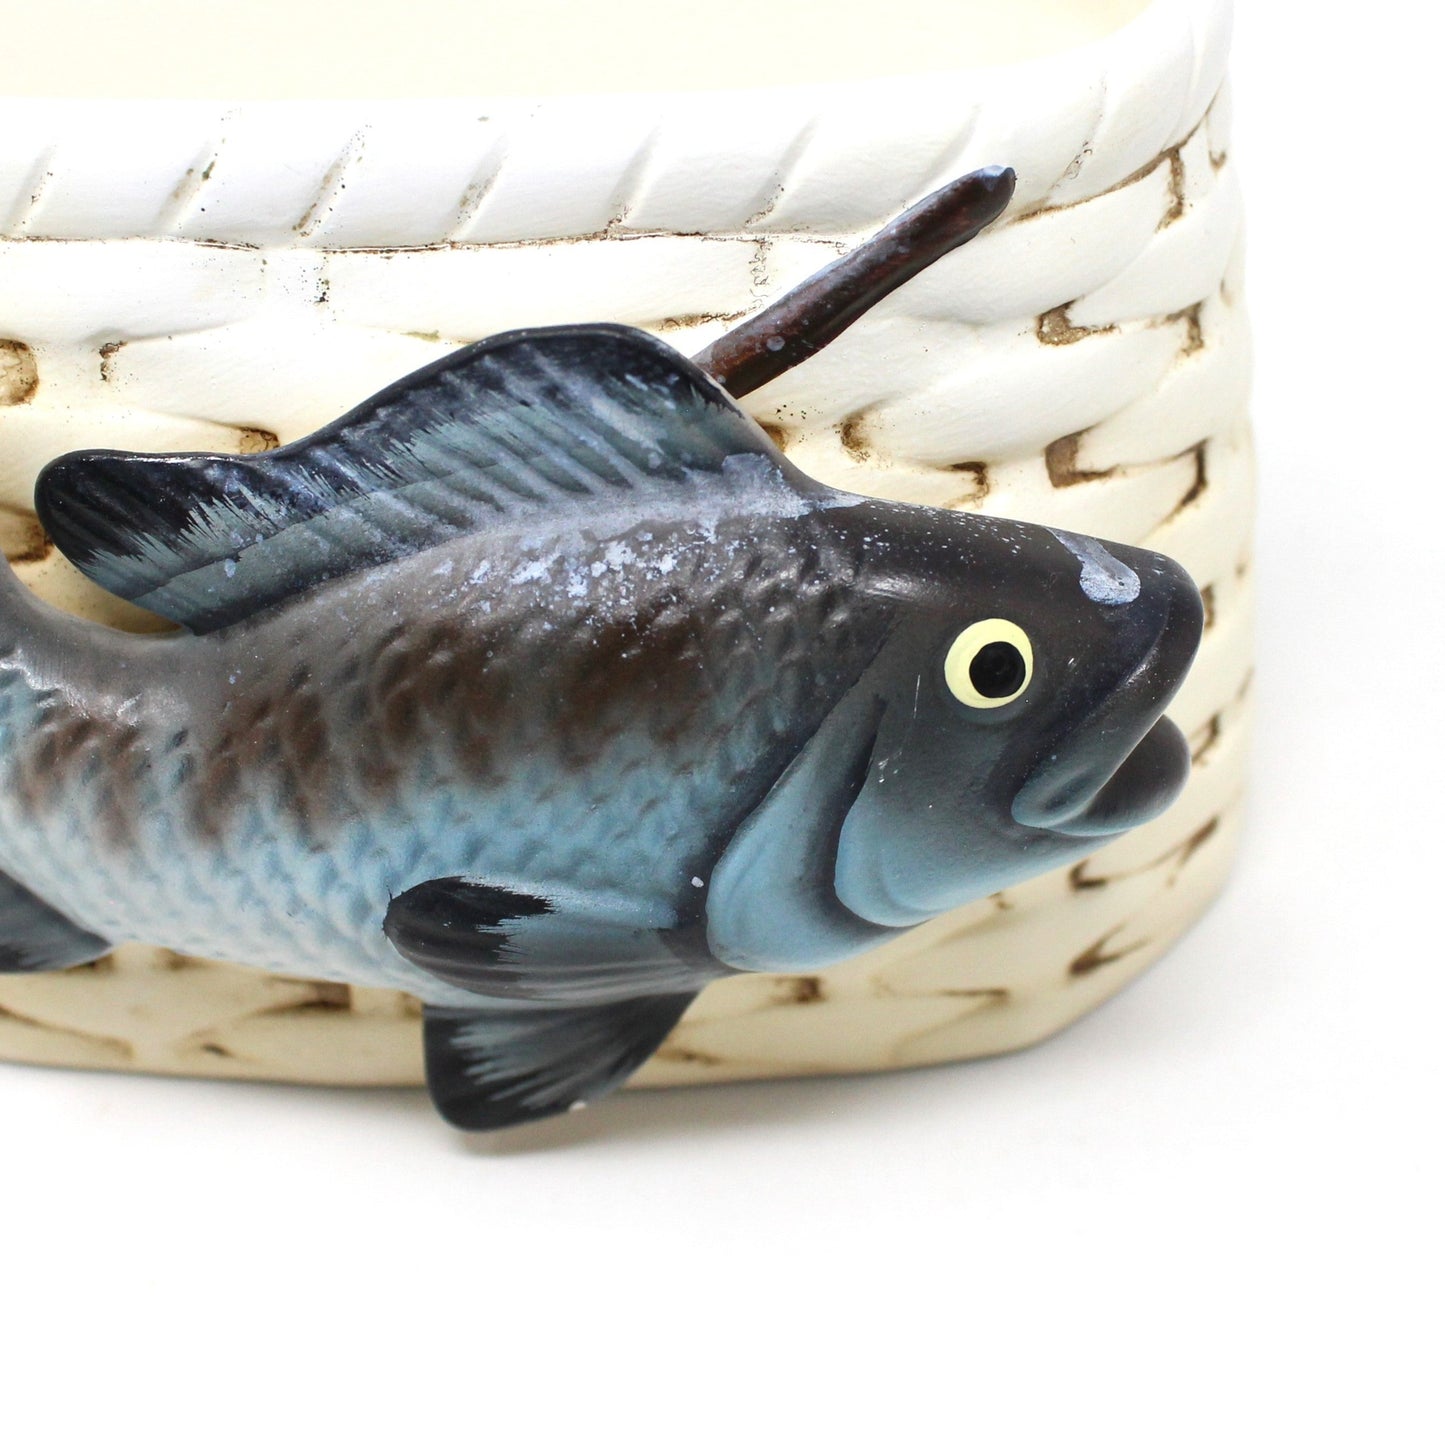 Planter / Vase, Napco, Fishing Creel Basket with Trout and Rod, Vintage Ceramic